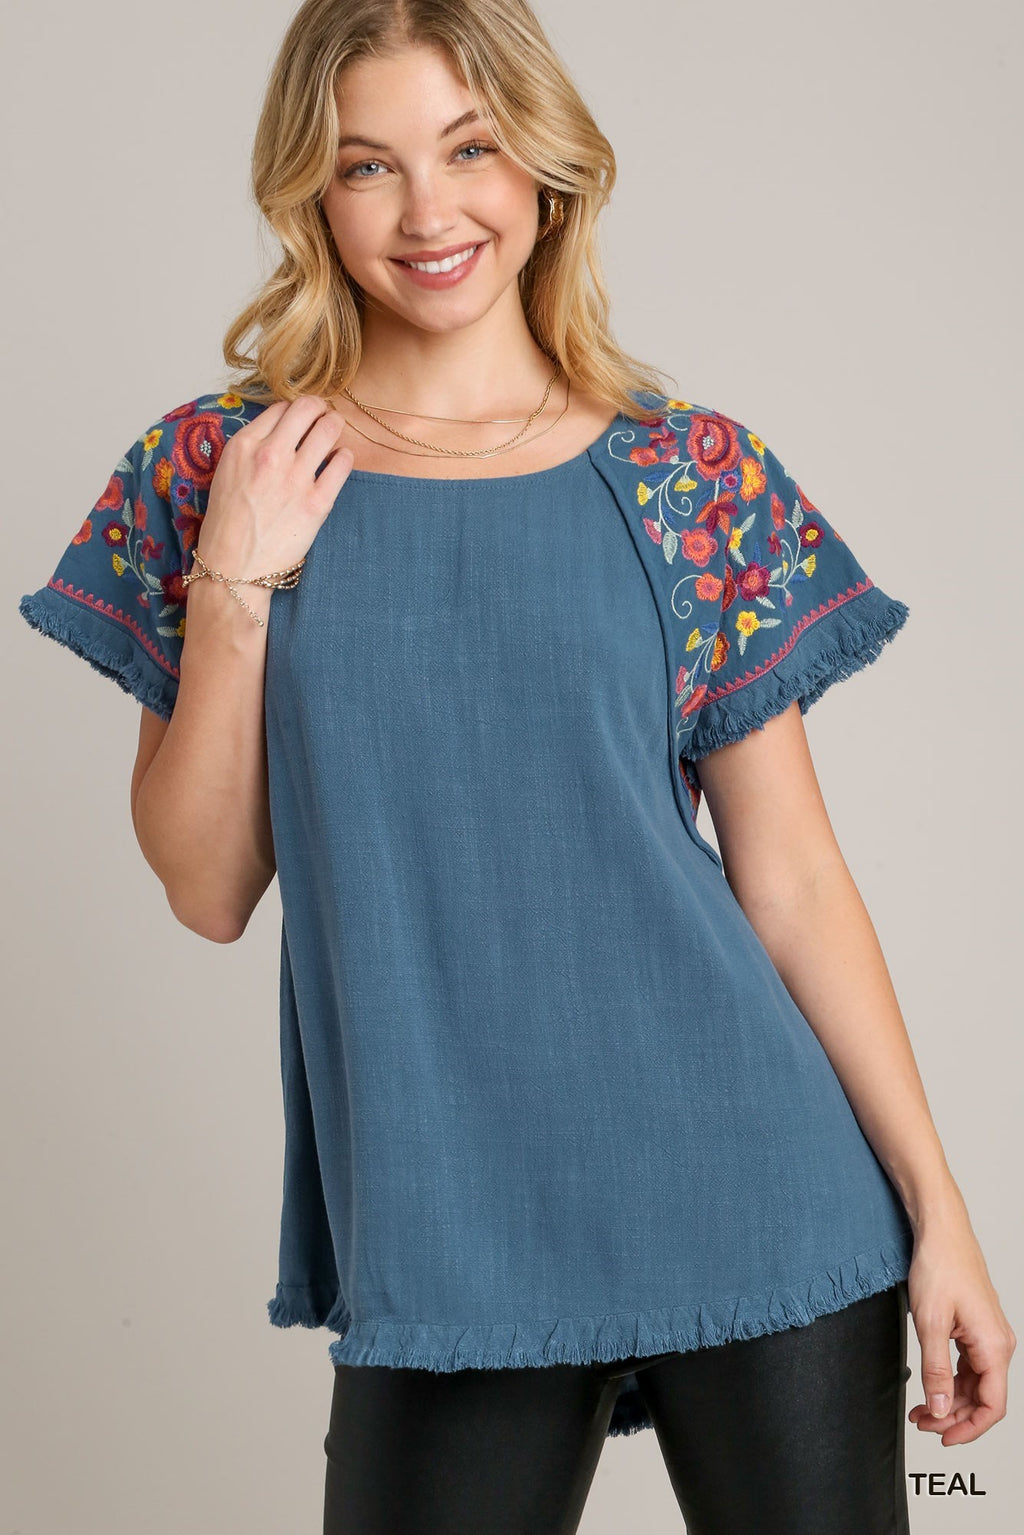 Sophia Embroidered Linen Top - Teal